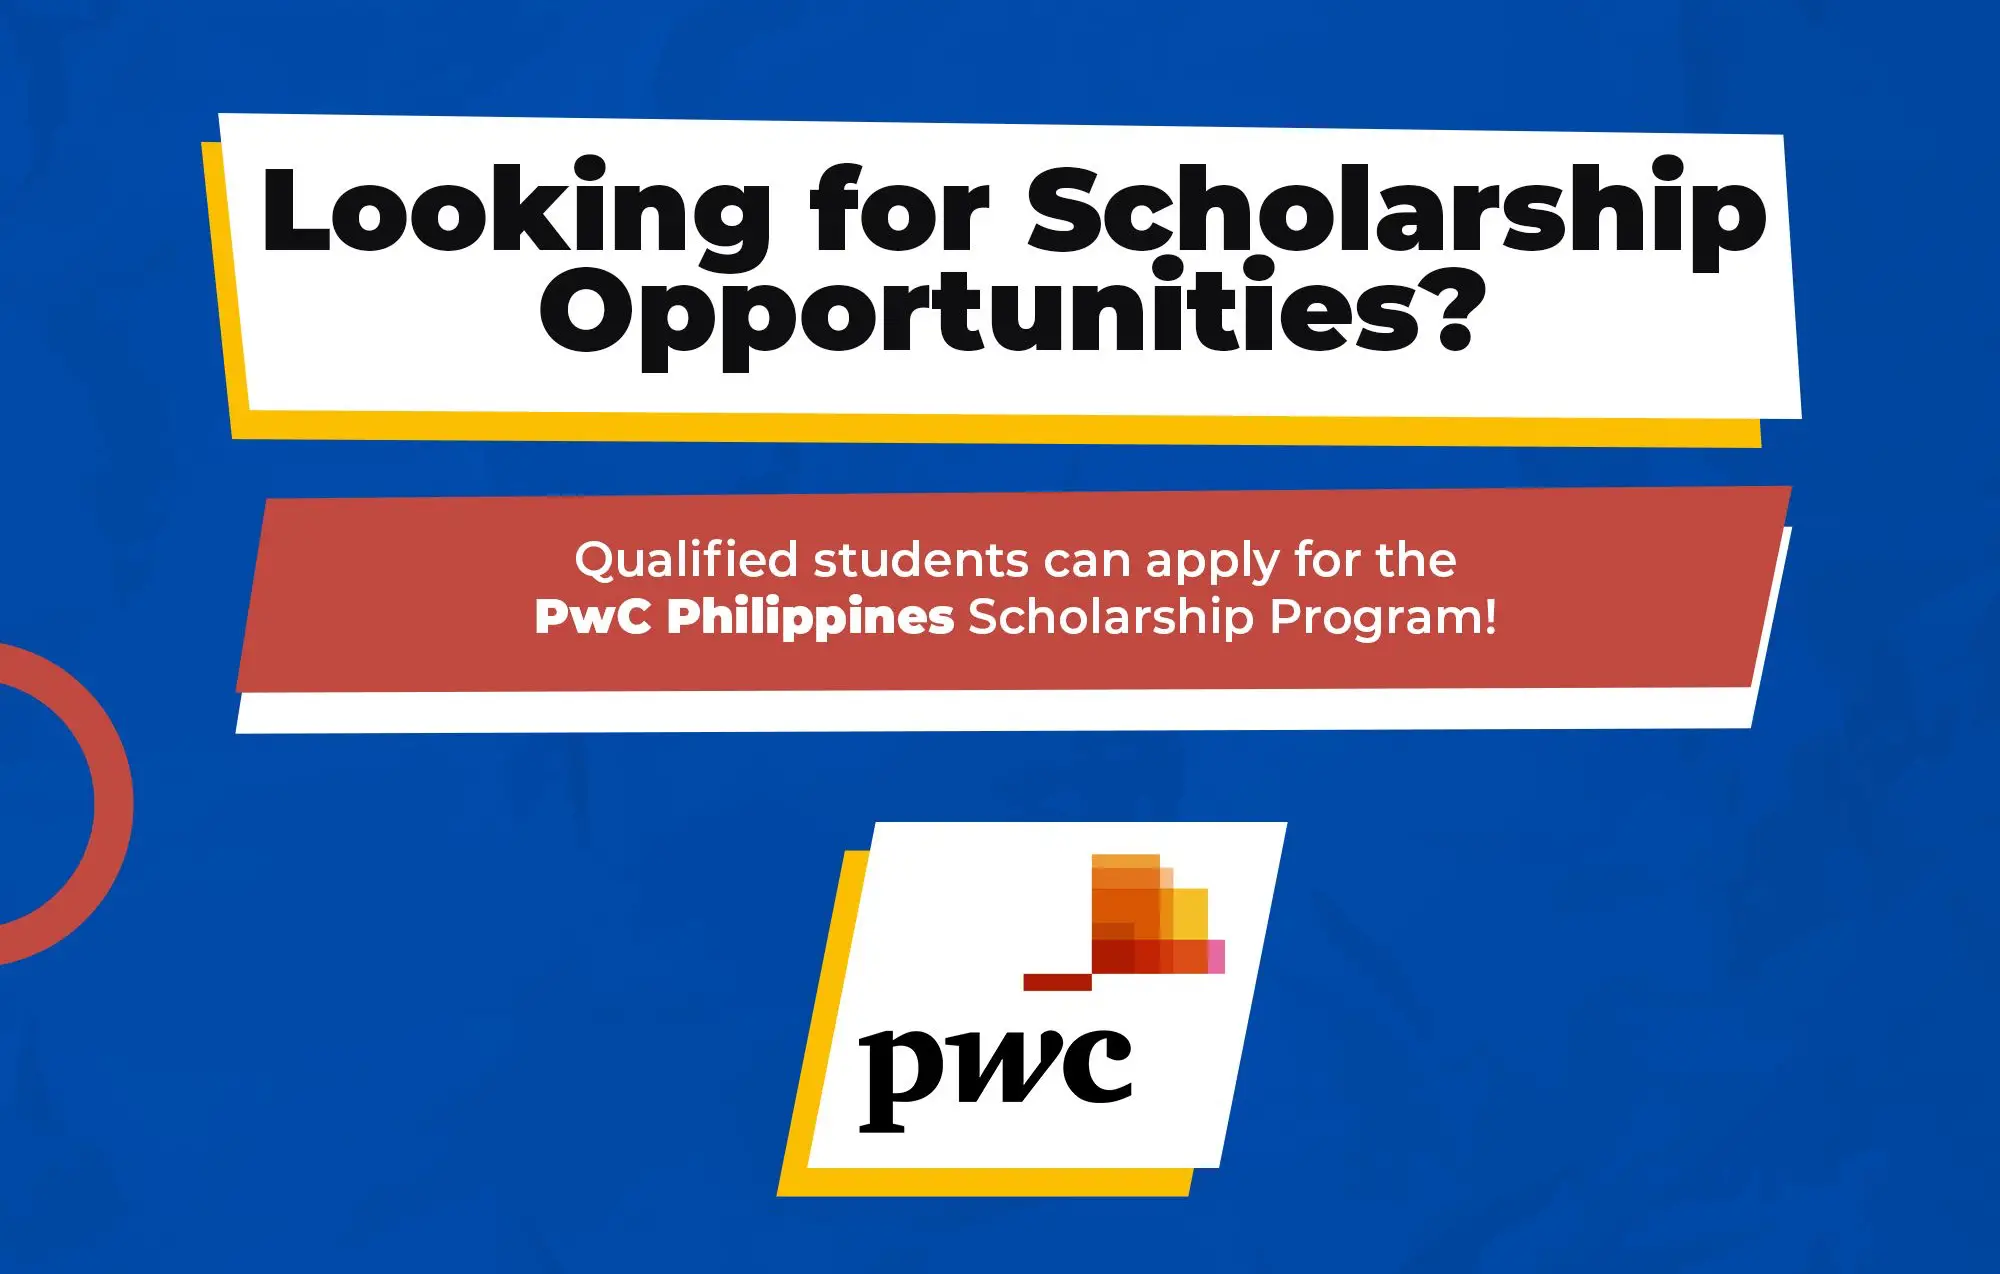 PwC Philippines Scholarship Program is now open for applications